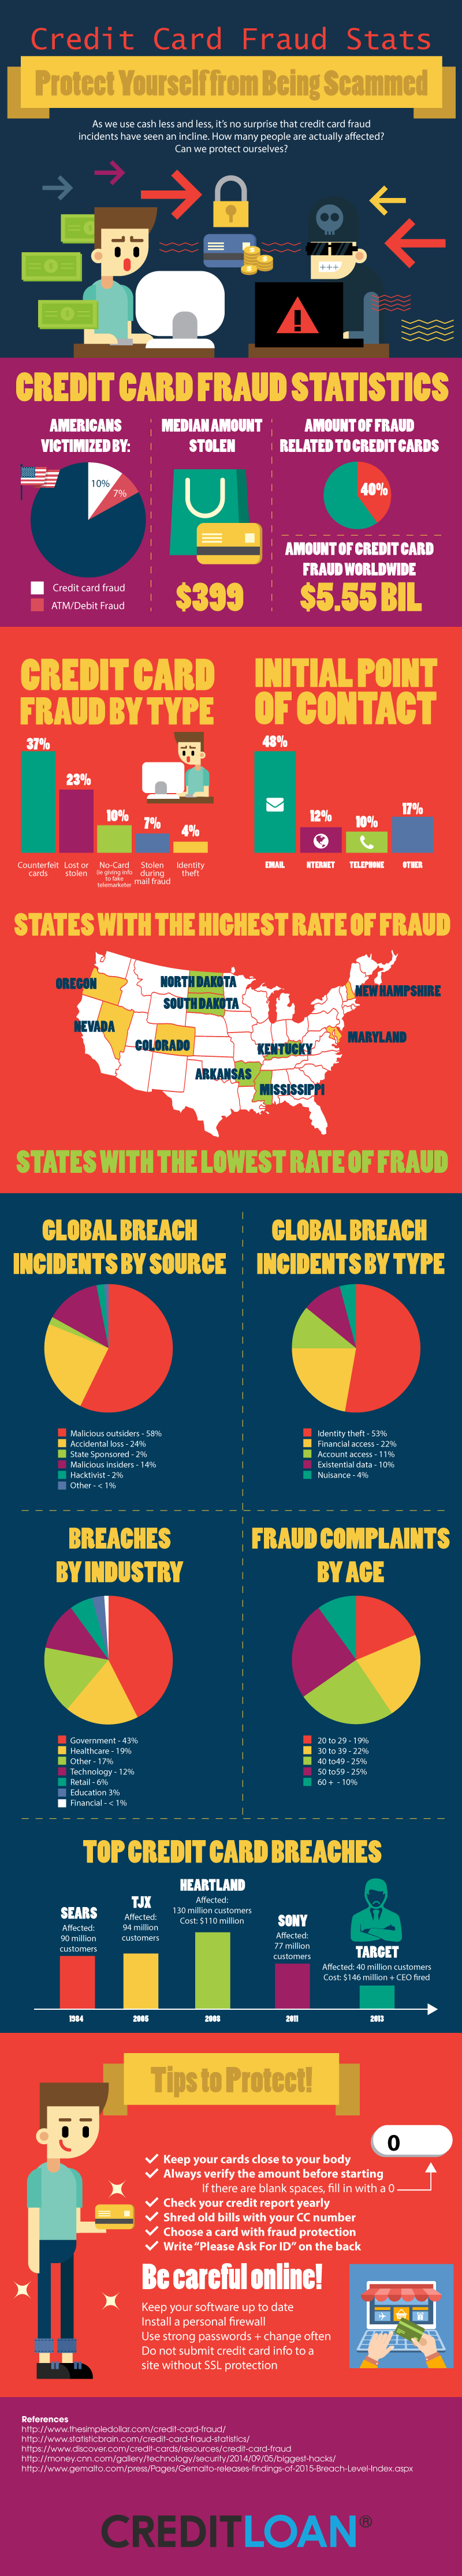 Credit Card Fraud Stats – Protect Yourself from Being Scammed